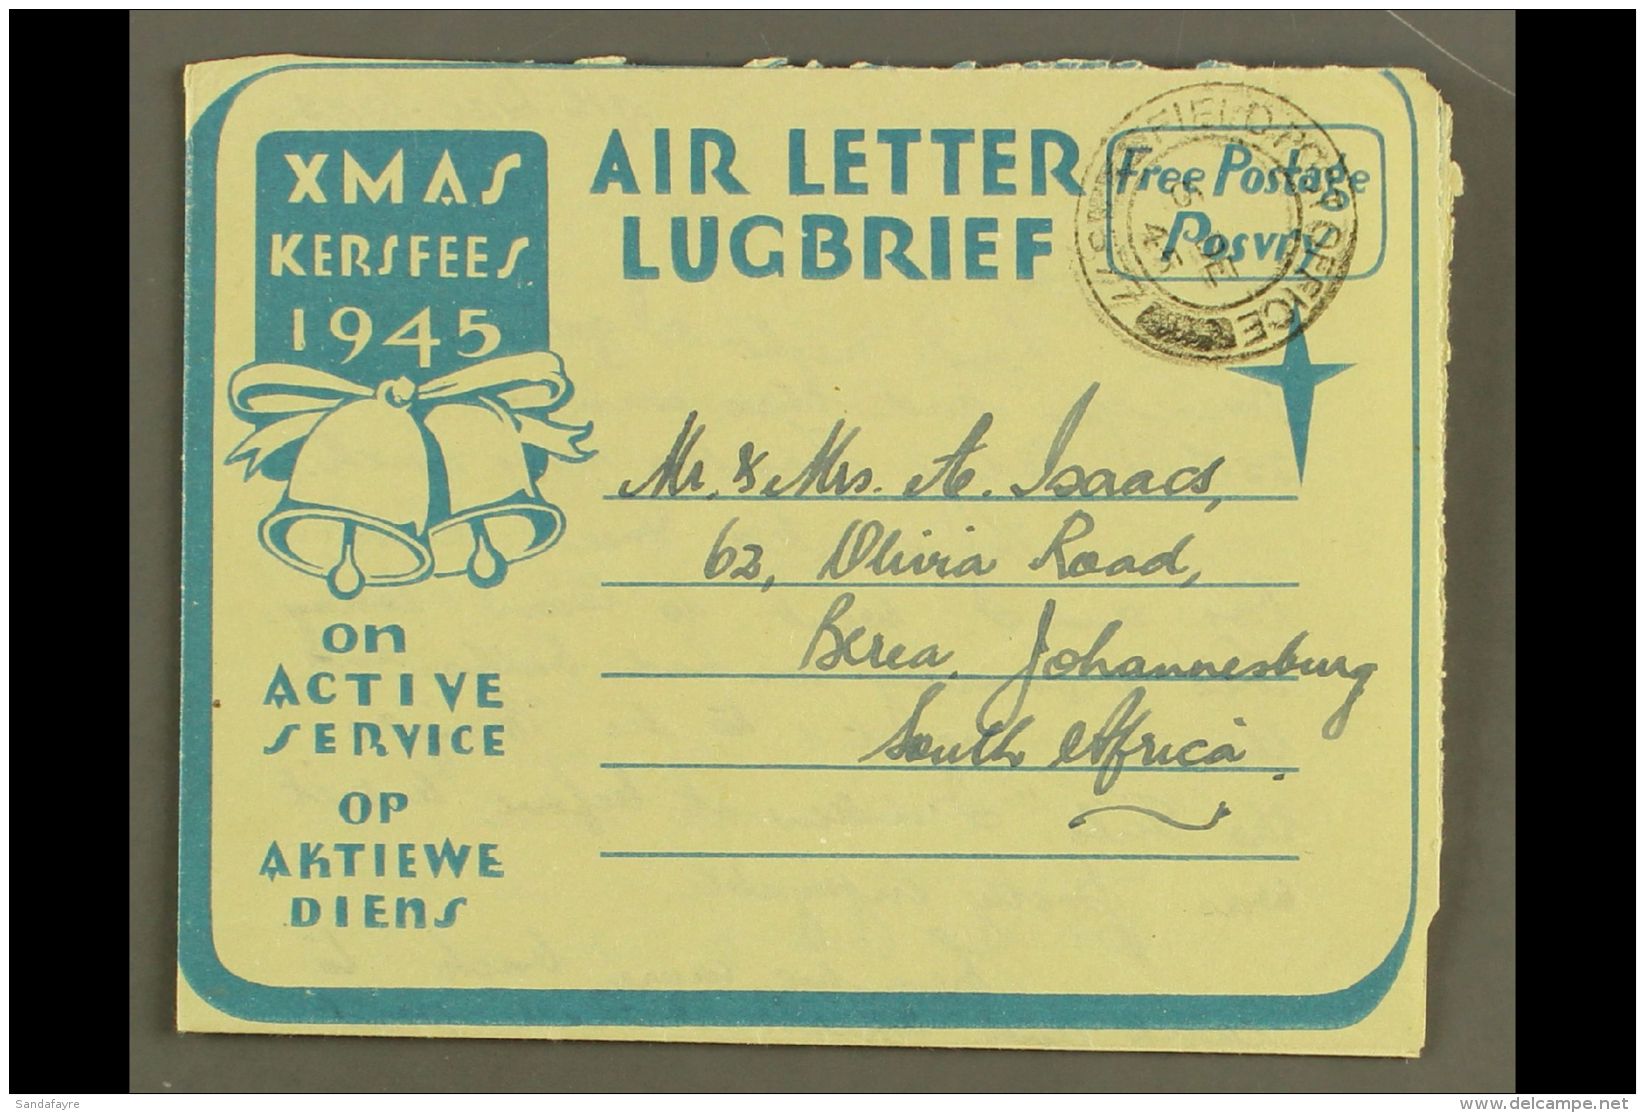 AEROGRAMME 1945 "Greetings From The North" Christmas Air Letter, Inscribed "Free Postage" For Serving Troops, 1979... - Unclassified